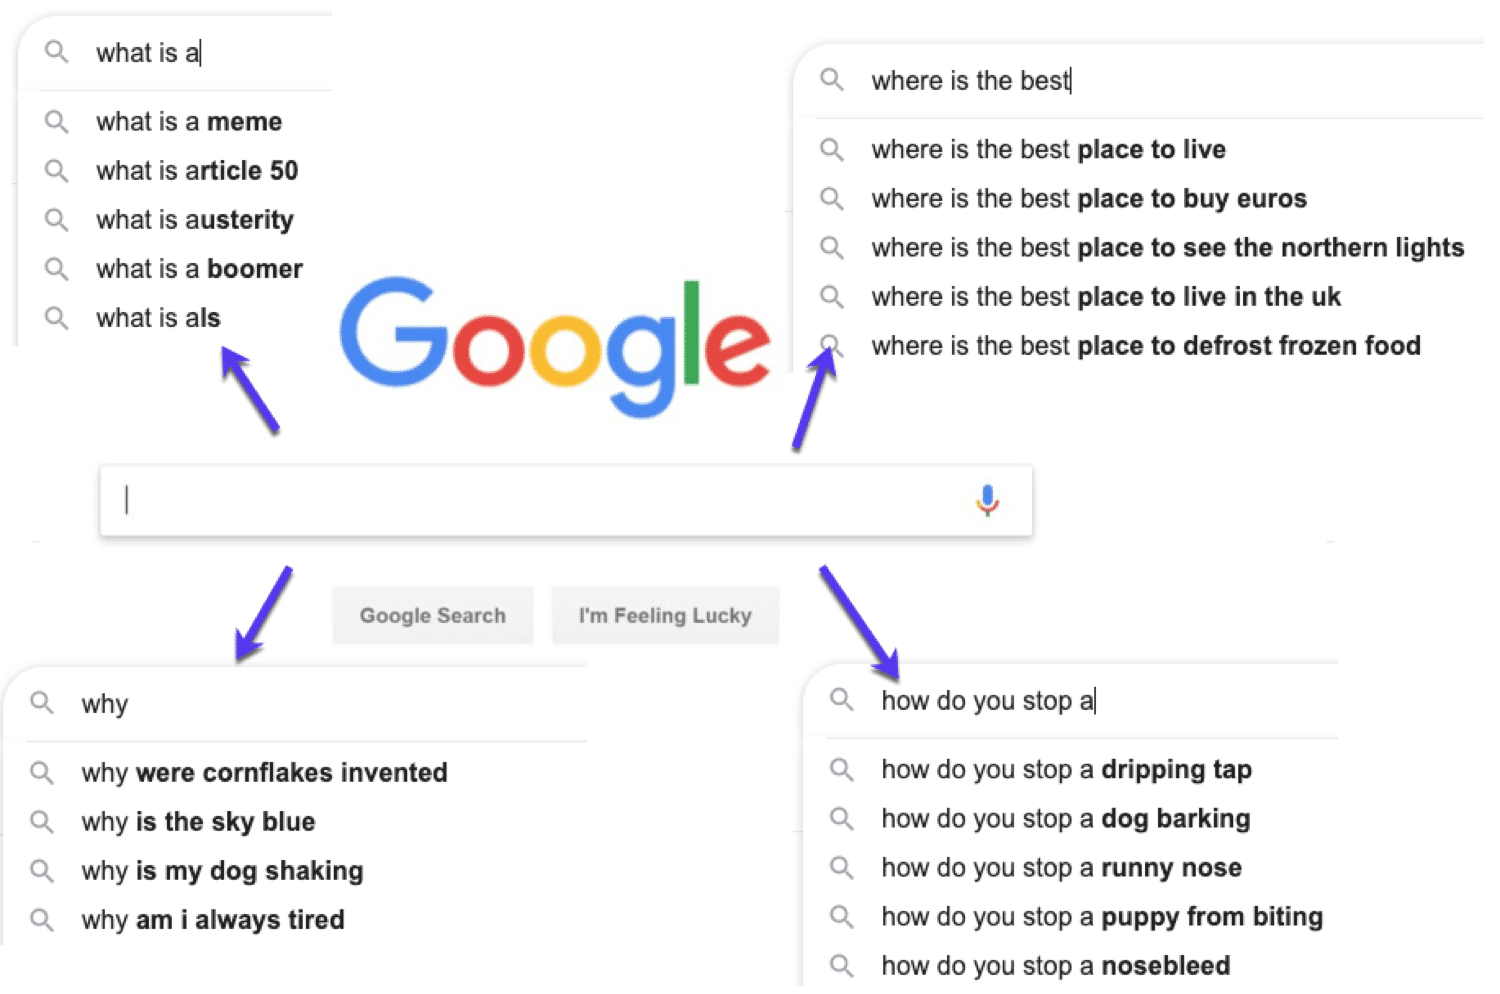 Examples of questions people search on Google